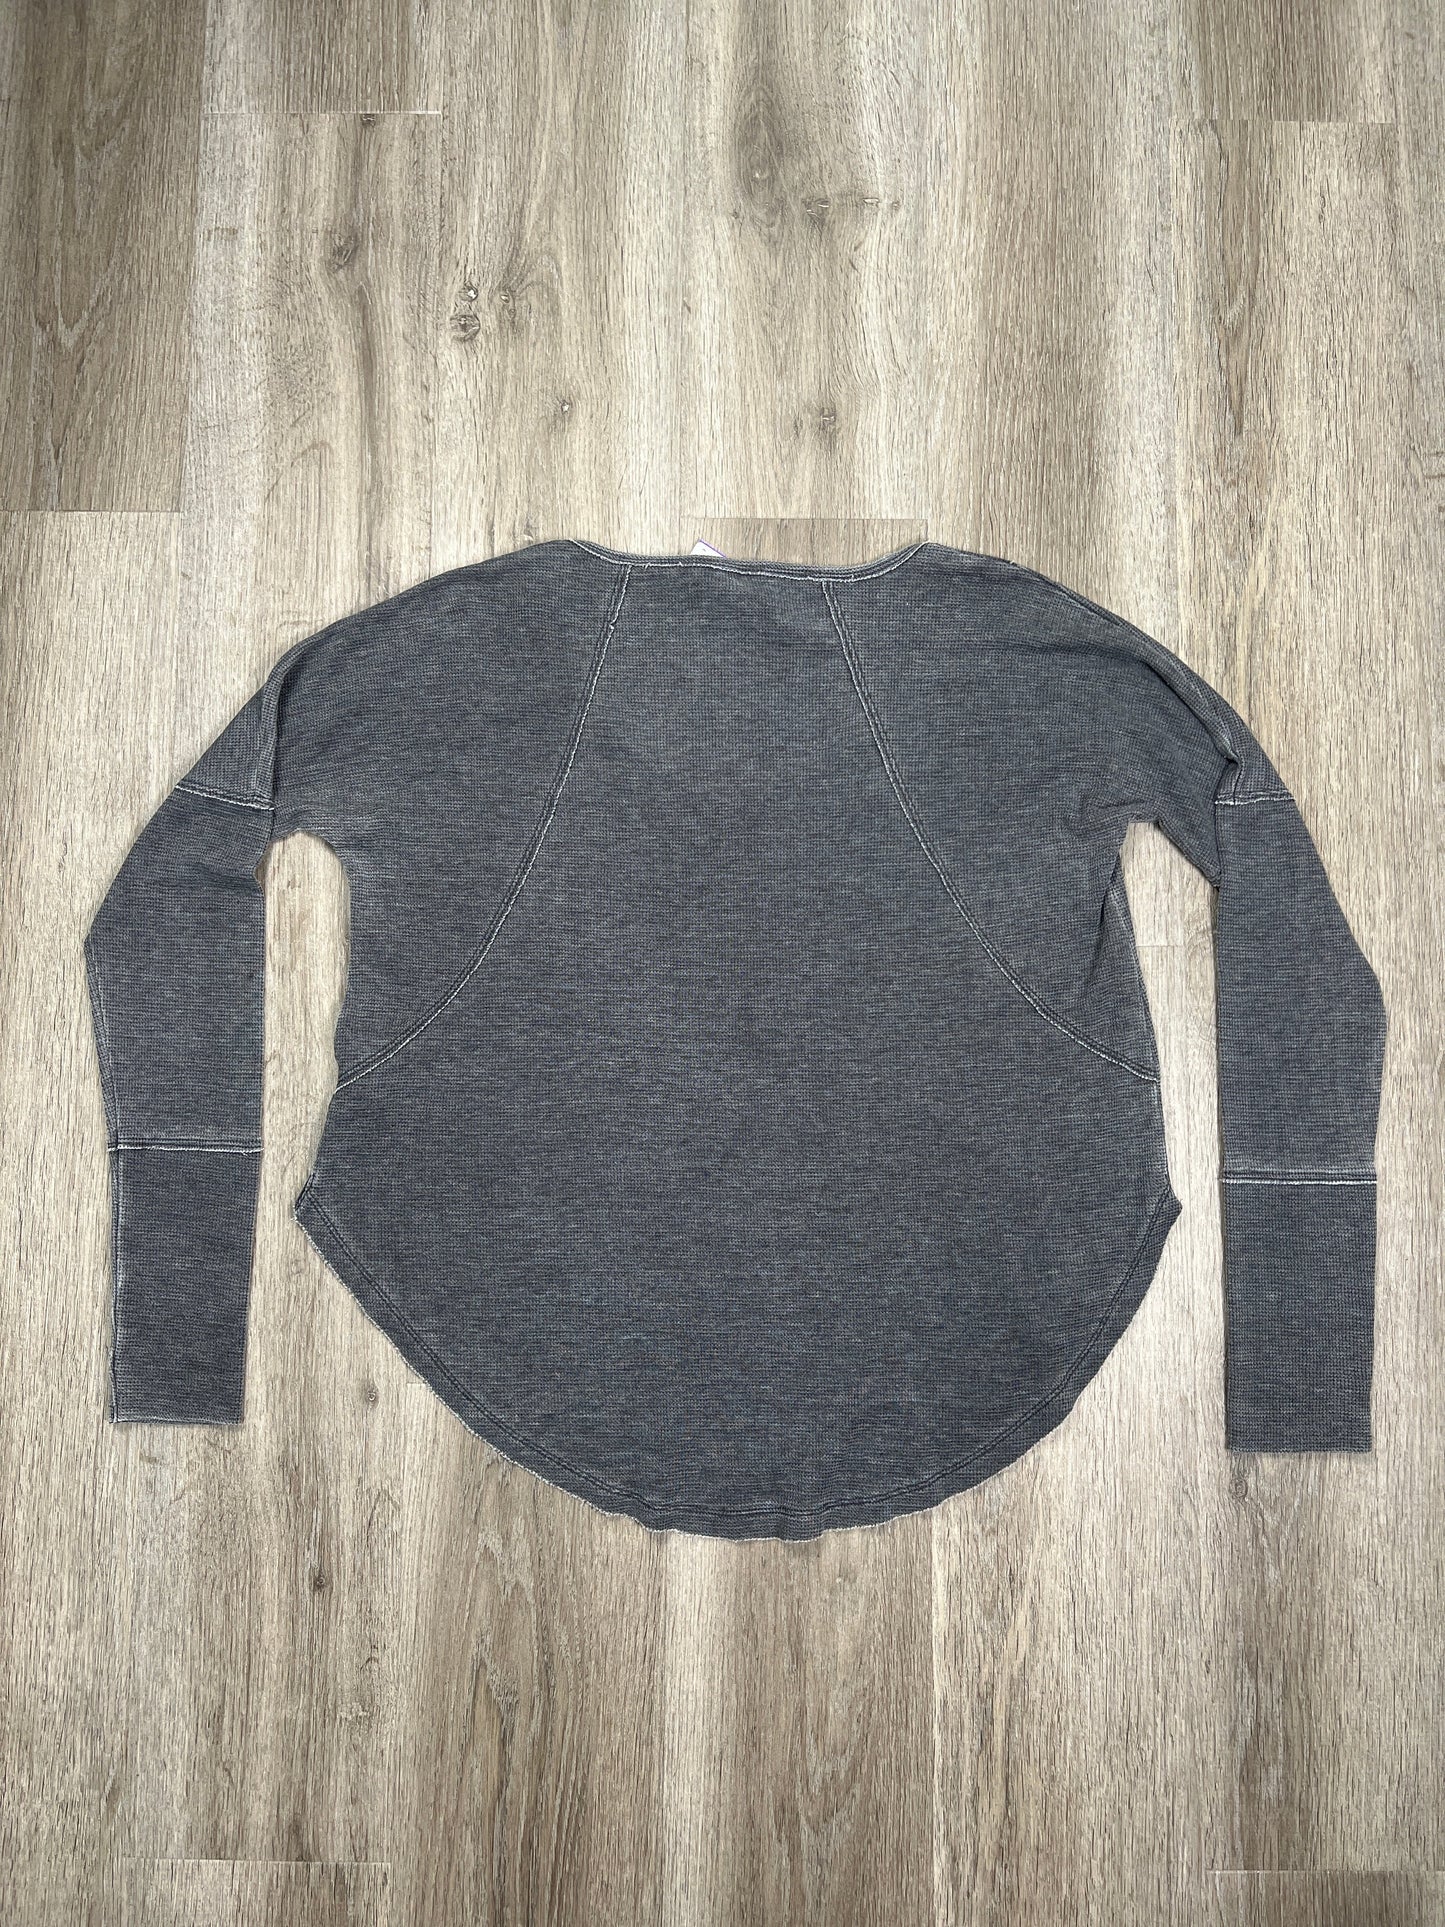 Grey Top Long Sleeve Lucky Brand, Size M